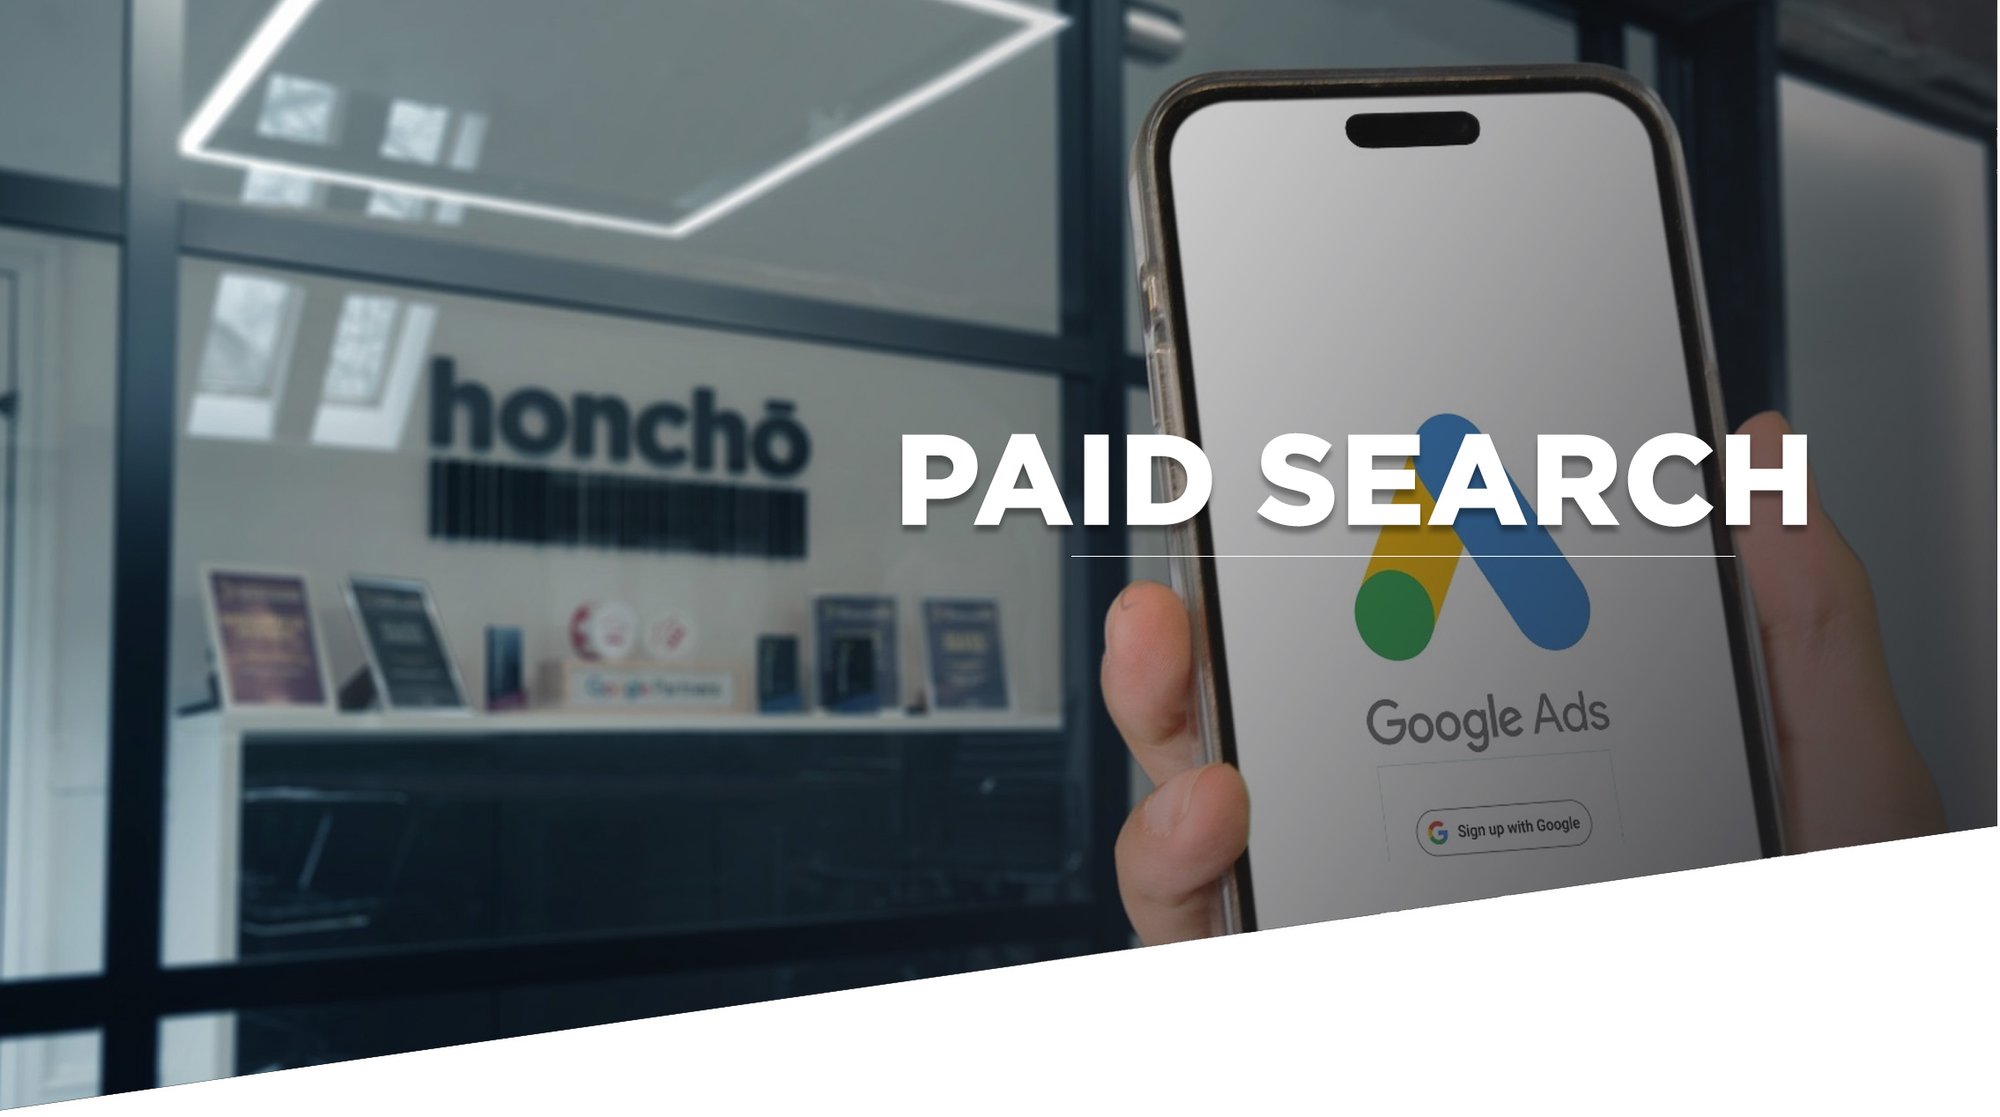 Paid Search Agency UK - Honcho